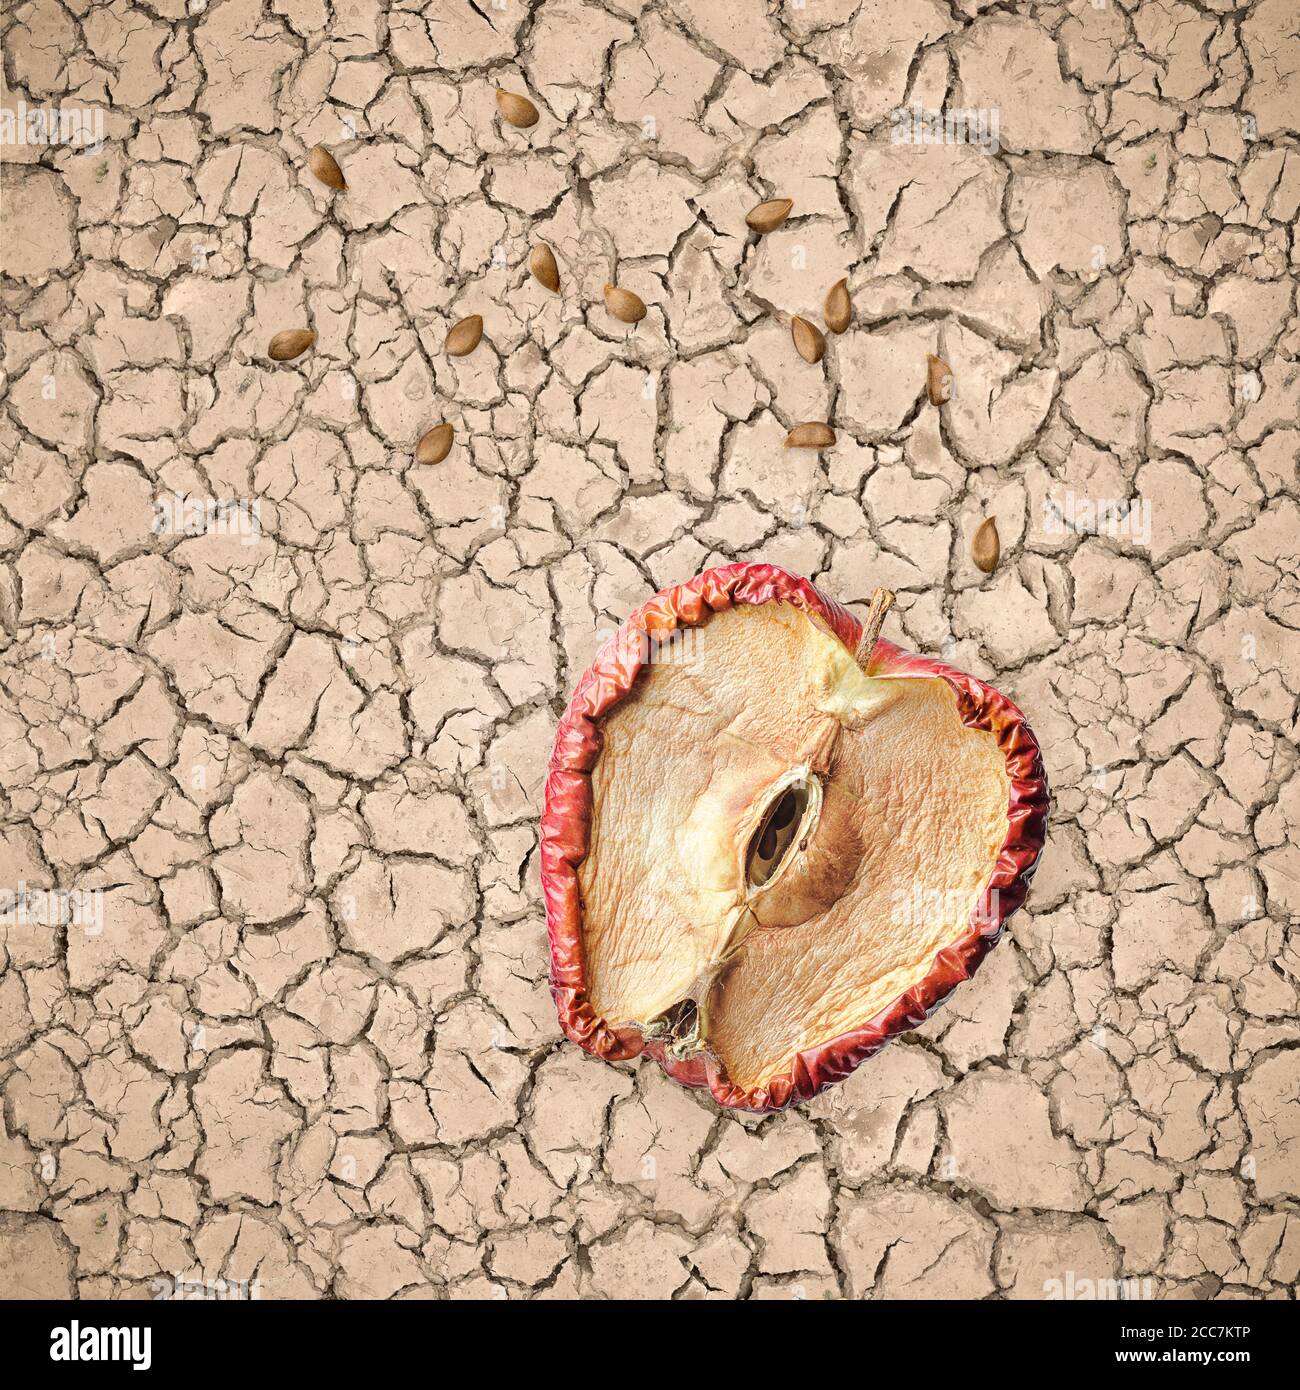 Half rotten apple and seeds on dry and cracked soil, hopeless concept with no future. Stock Photo